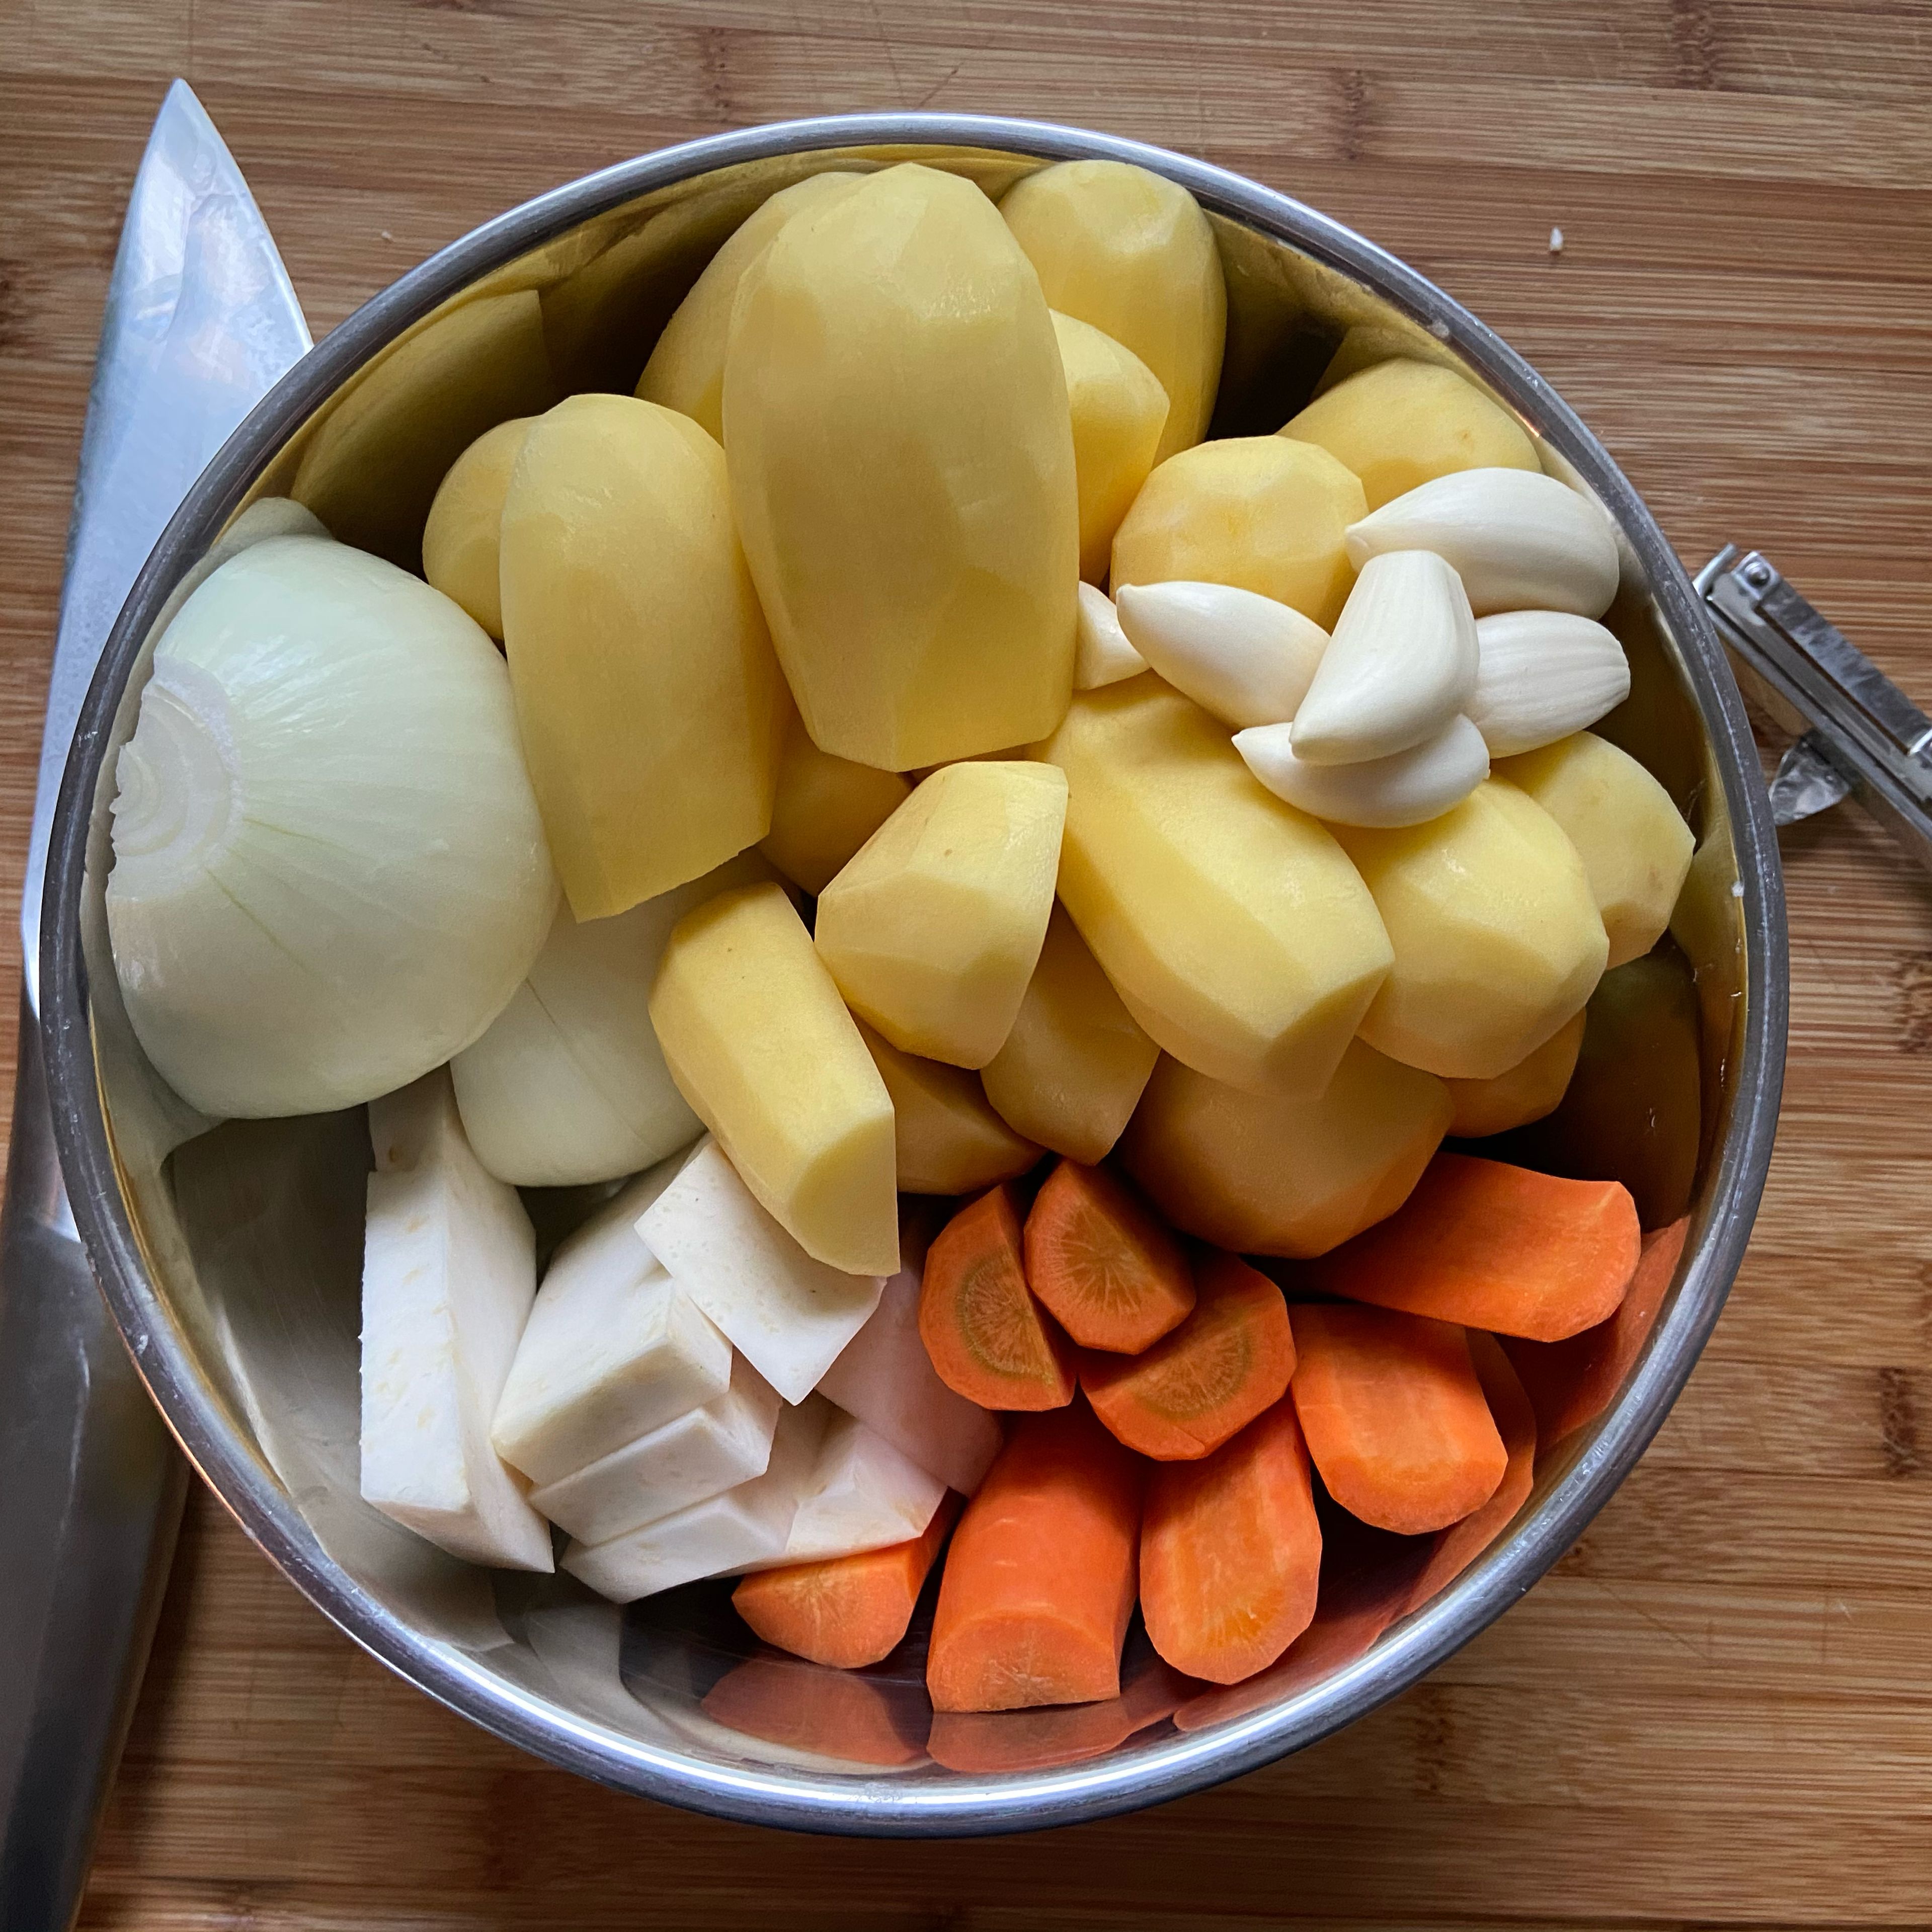 Cut one onion, the potatoes, and carrots in half and cut the celery into similar sized pieces.